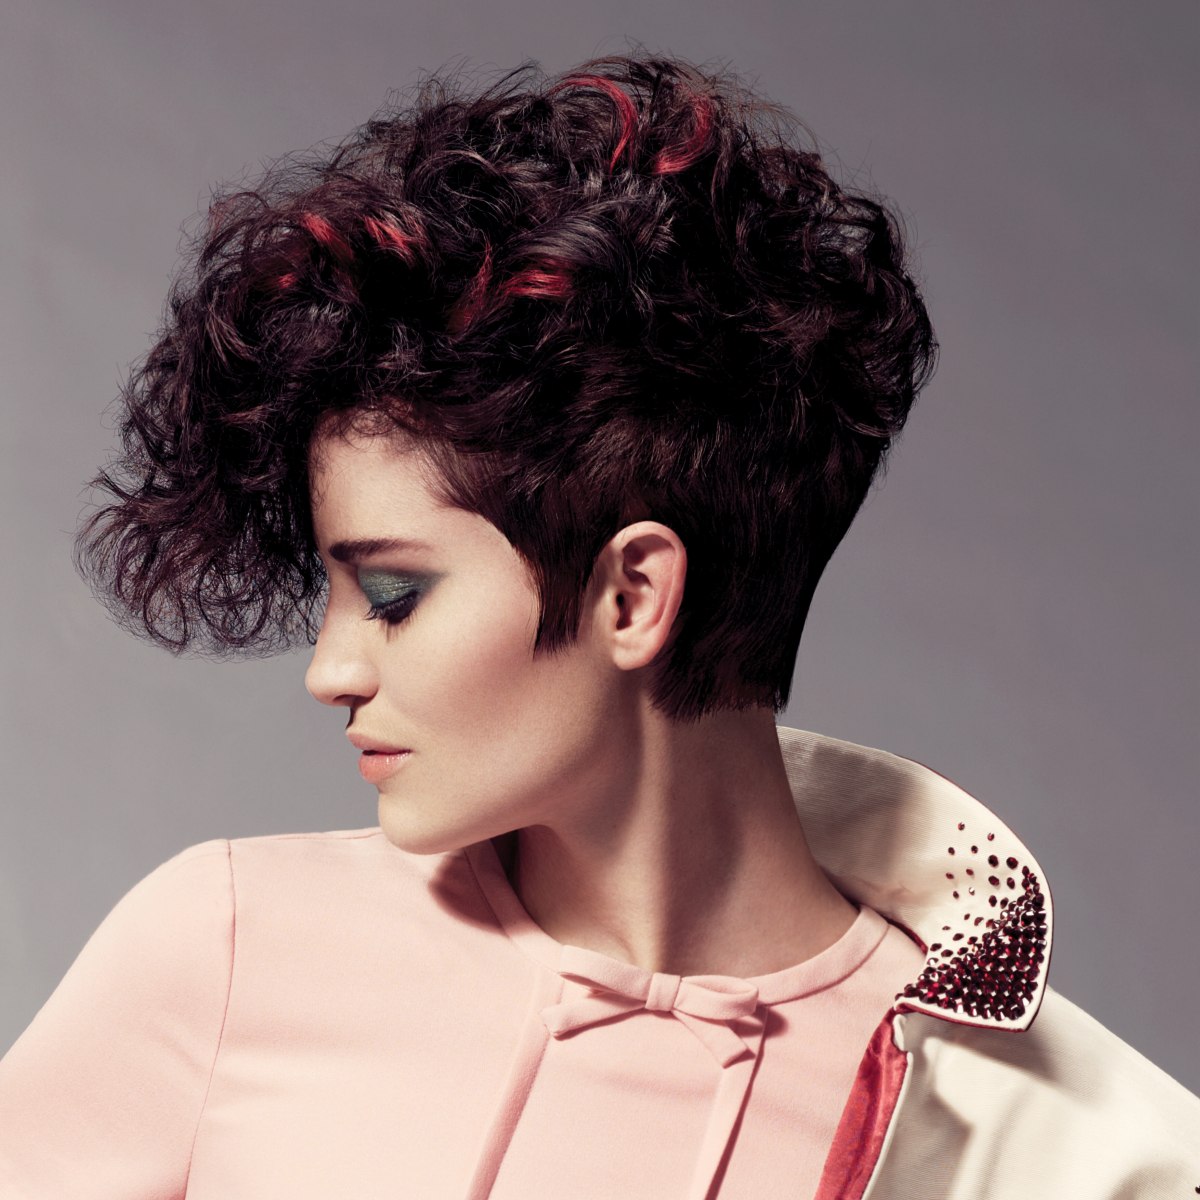 Modern short graduated hairstyle with full and curly bangs